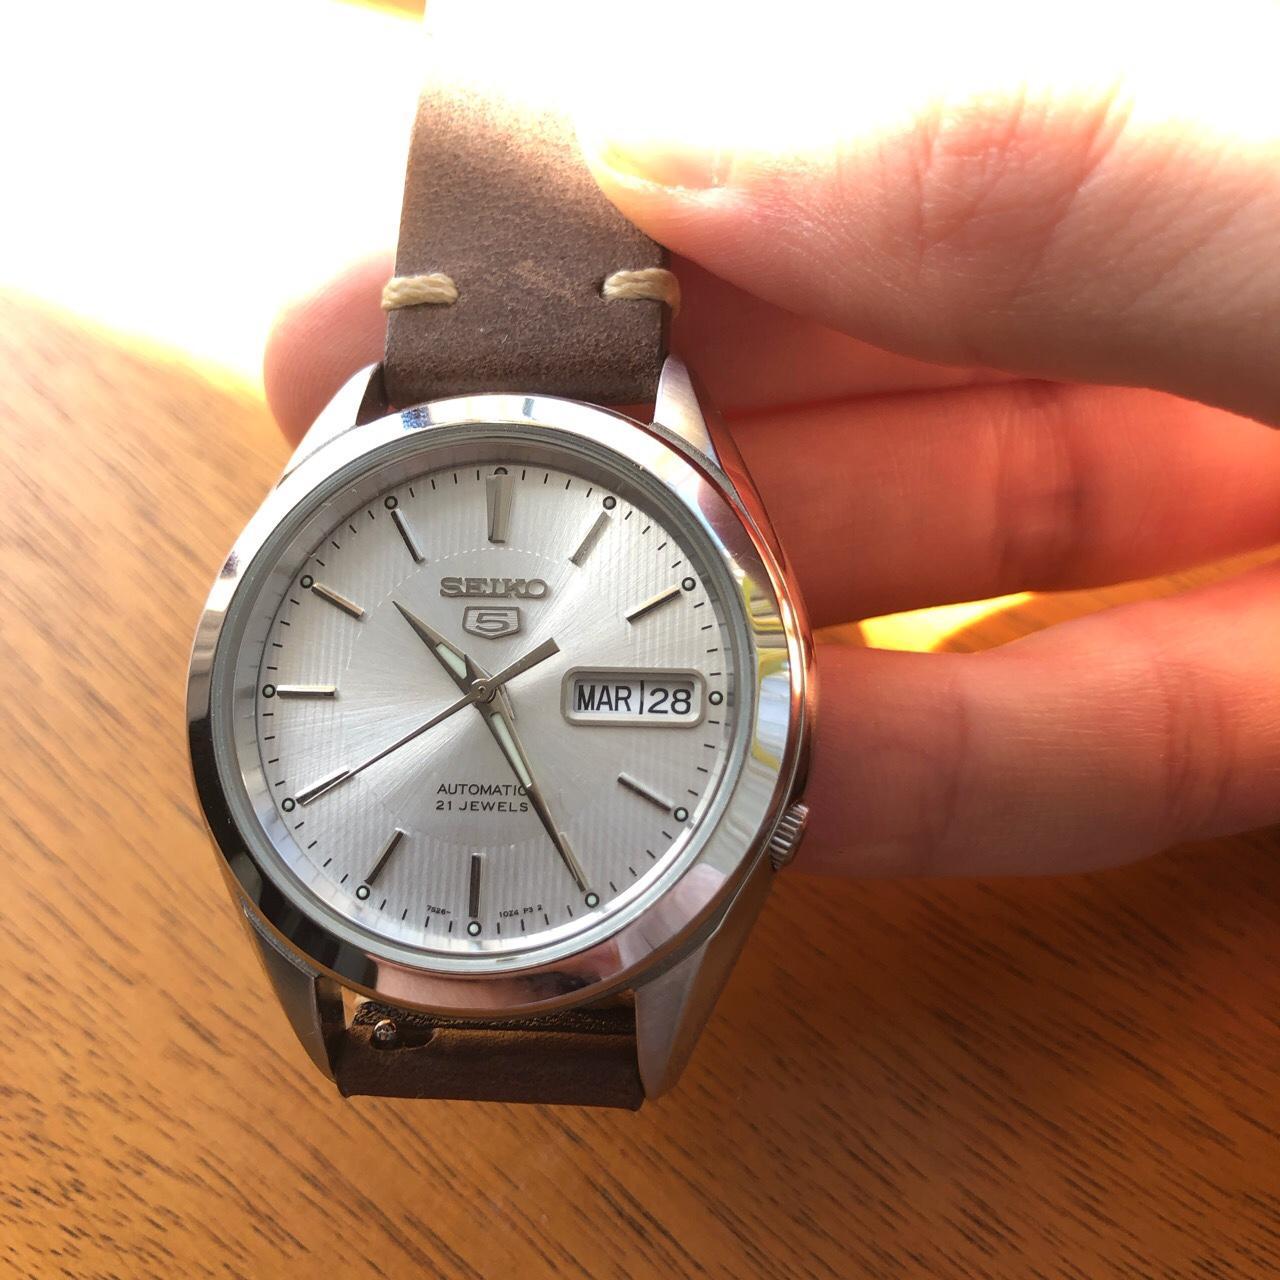 Product Image 2 - seiko snkl15

(not accepting offers on